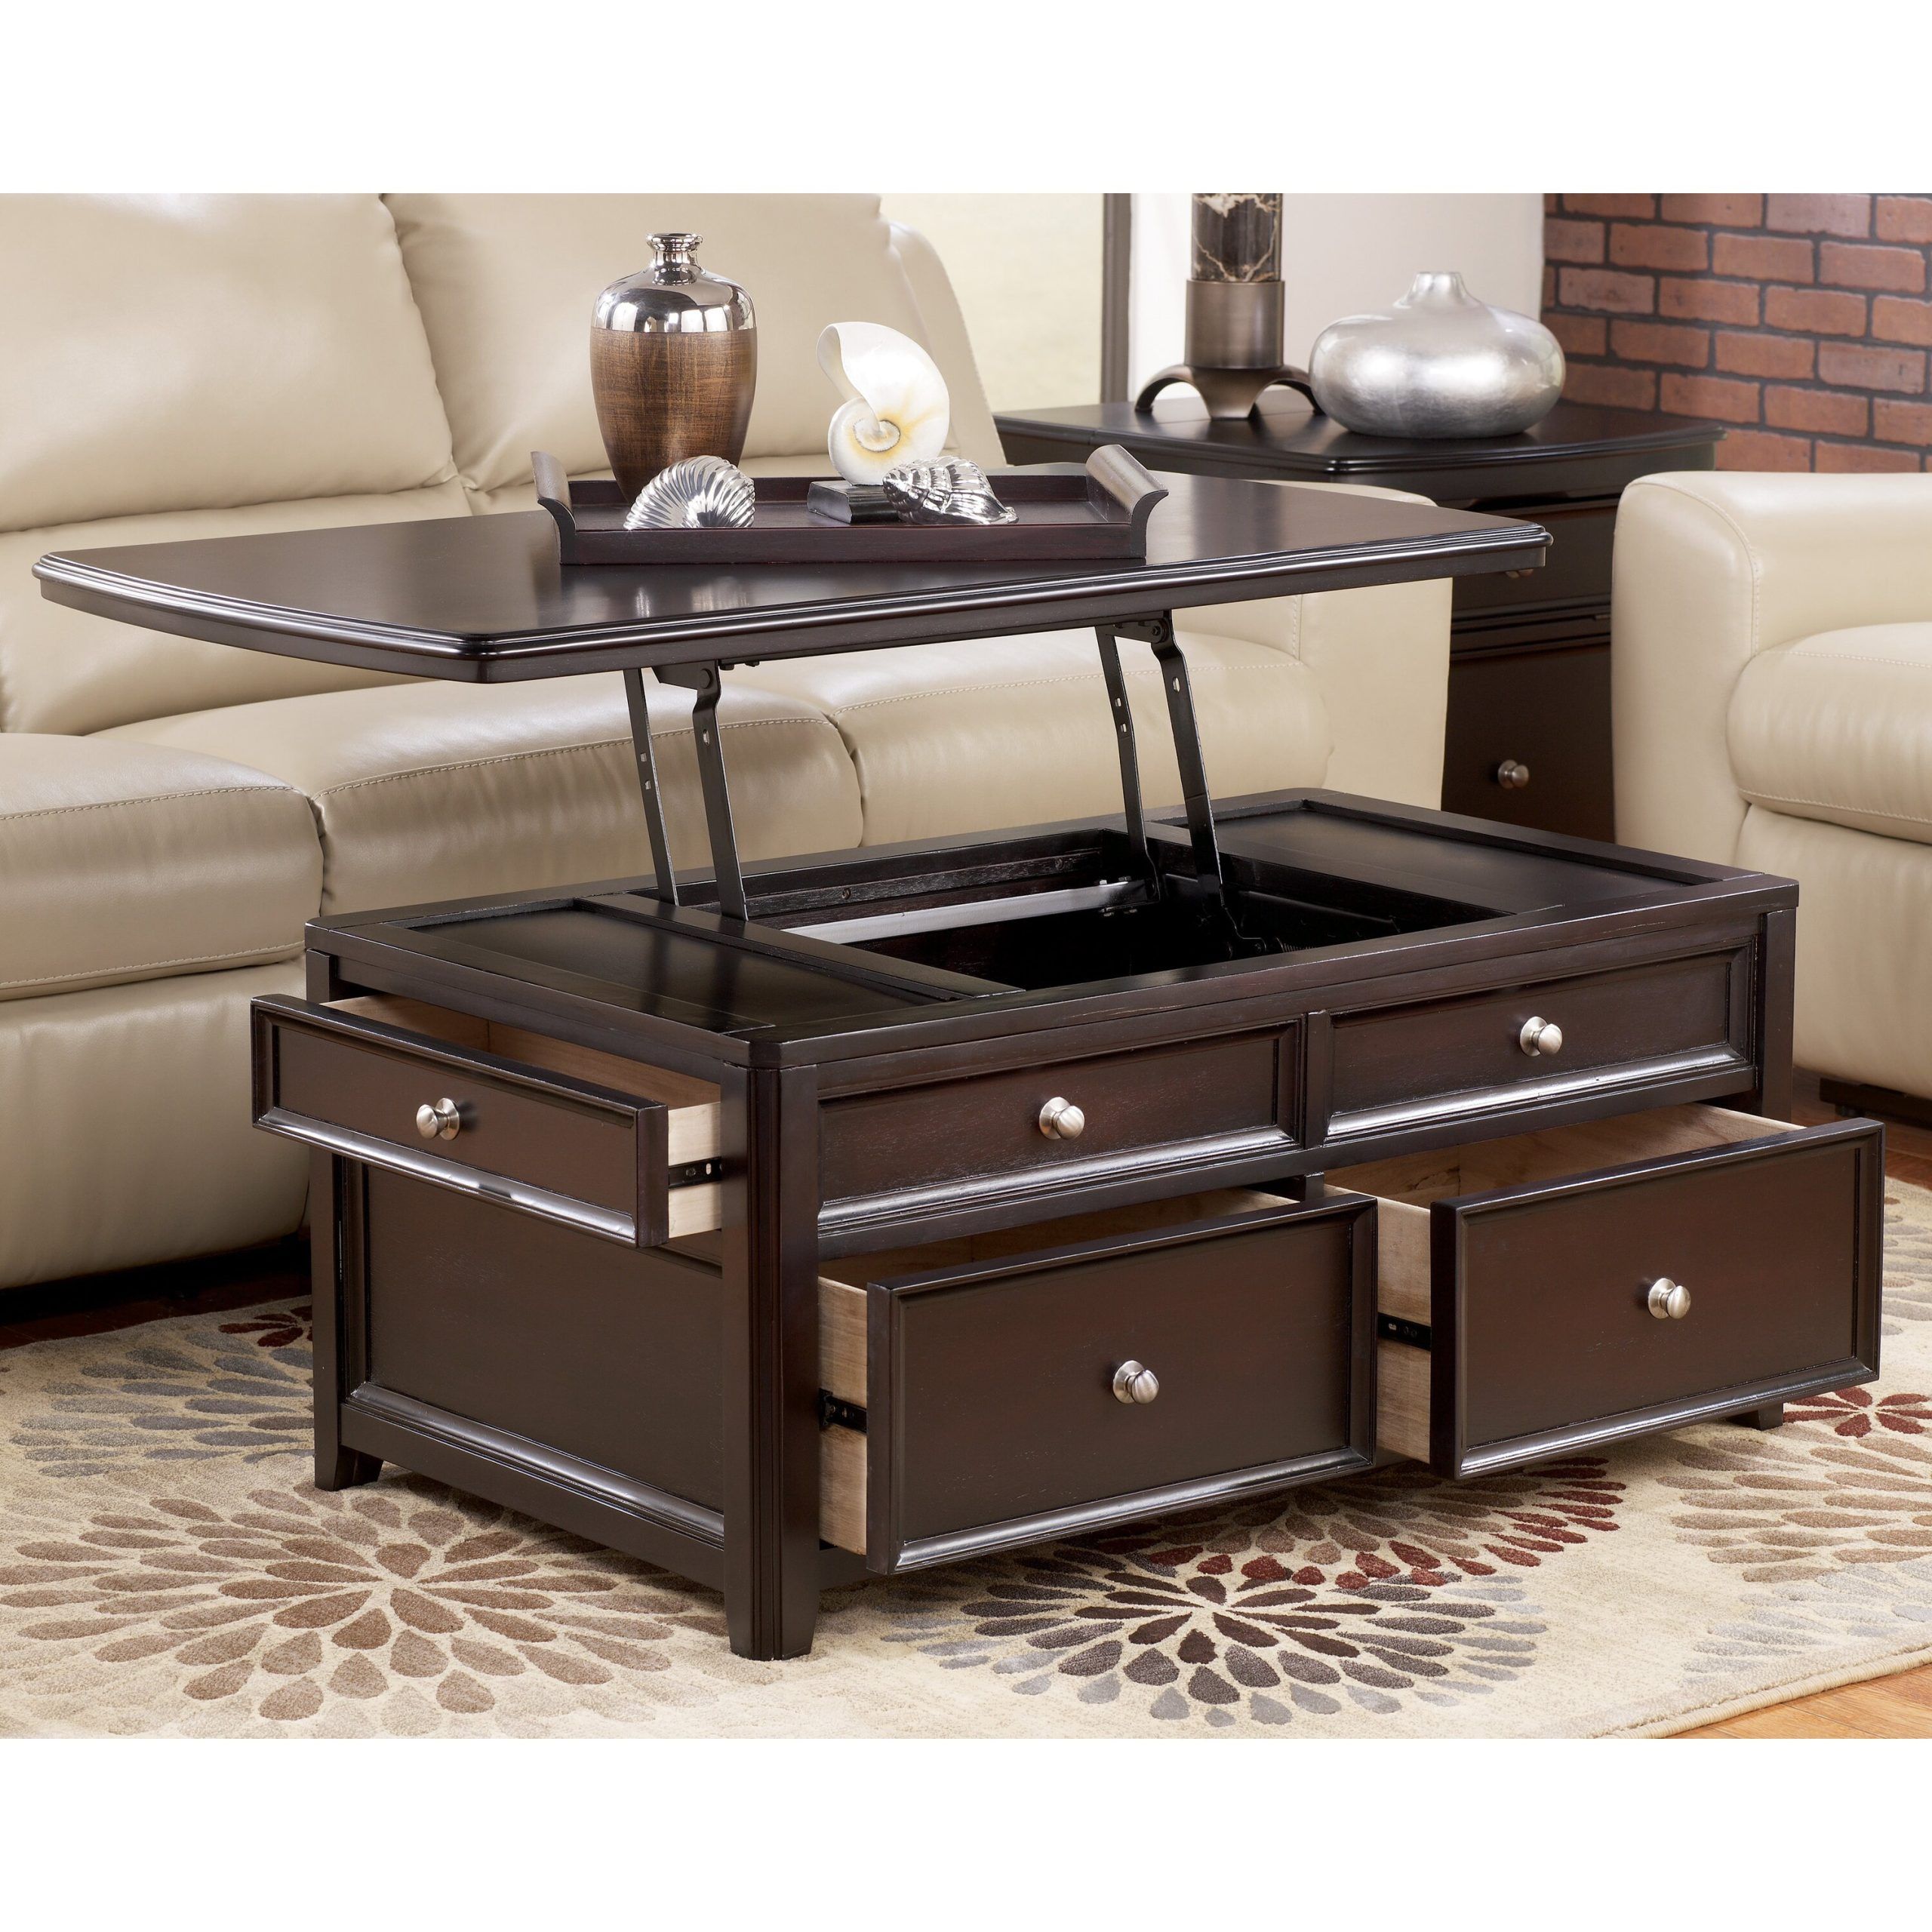 Wayfair Uk Lift Top Coffee Table / Ivy Bronx Lucier Lift Top Coffee Within Lift Top Coffee Tables With Storage (View 19 of 20)